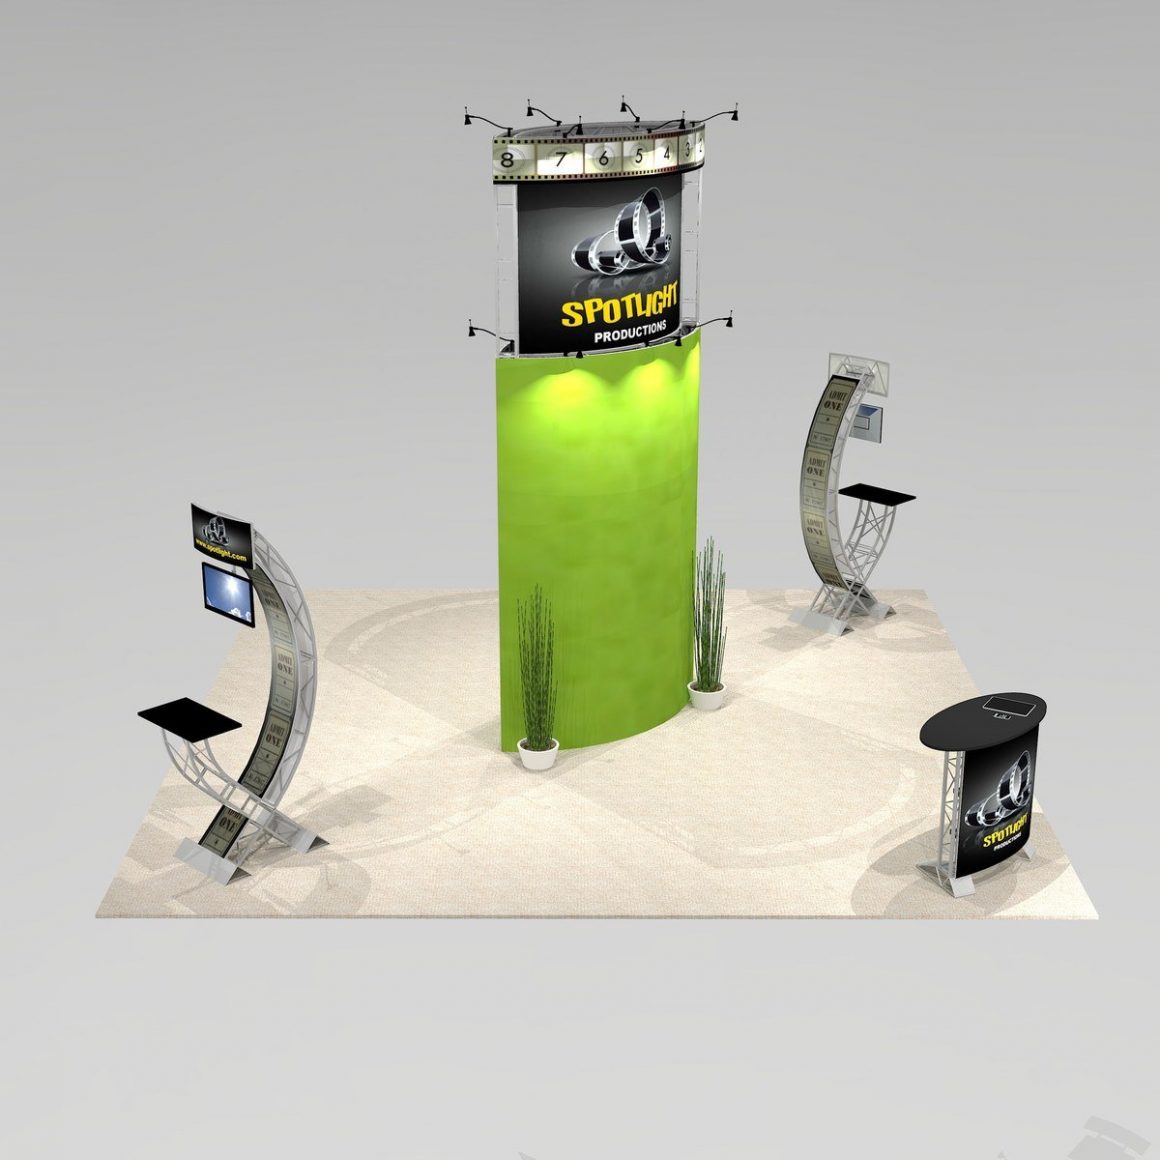 Minimal layout and Stylish trade show exhibit design COR2020 Graphic Package B